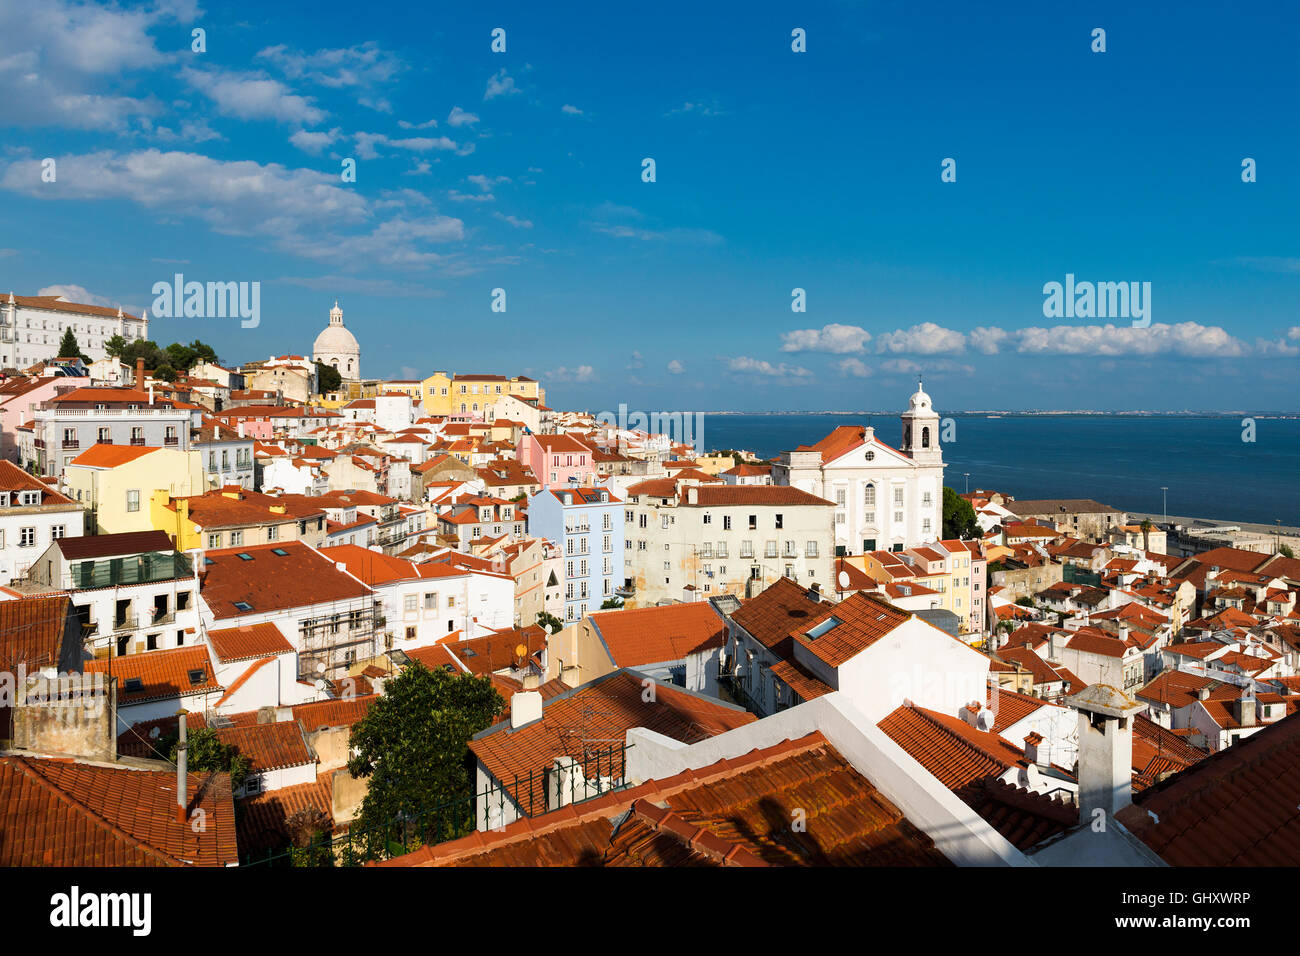 View of the Alfama neighborhood in Lisbon, Portugal from the Portas do Sol viewpoint; Concept for travel in Lisbon, Portugal Stock Photo